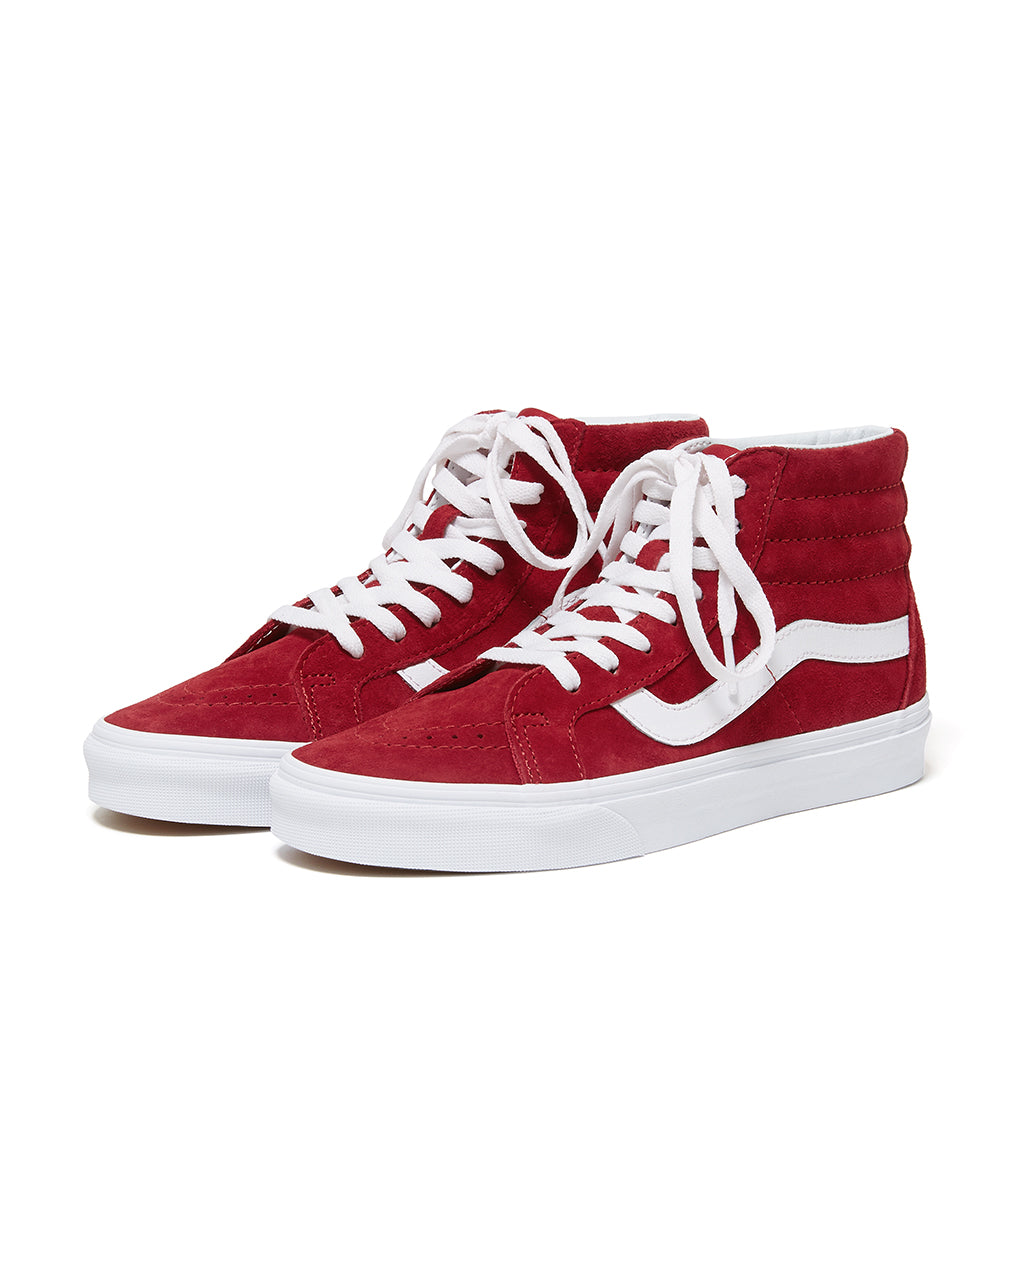 Sk8-Hi - Red Suede by vans - shoes - ban.do